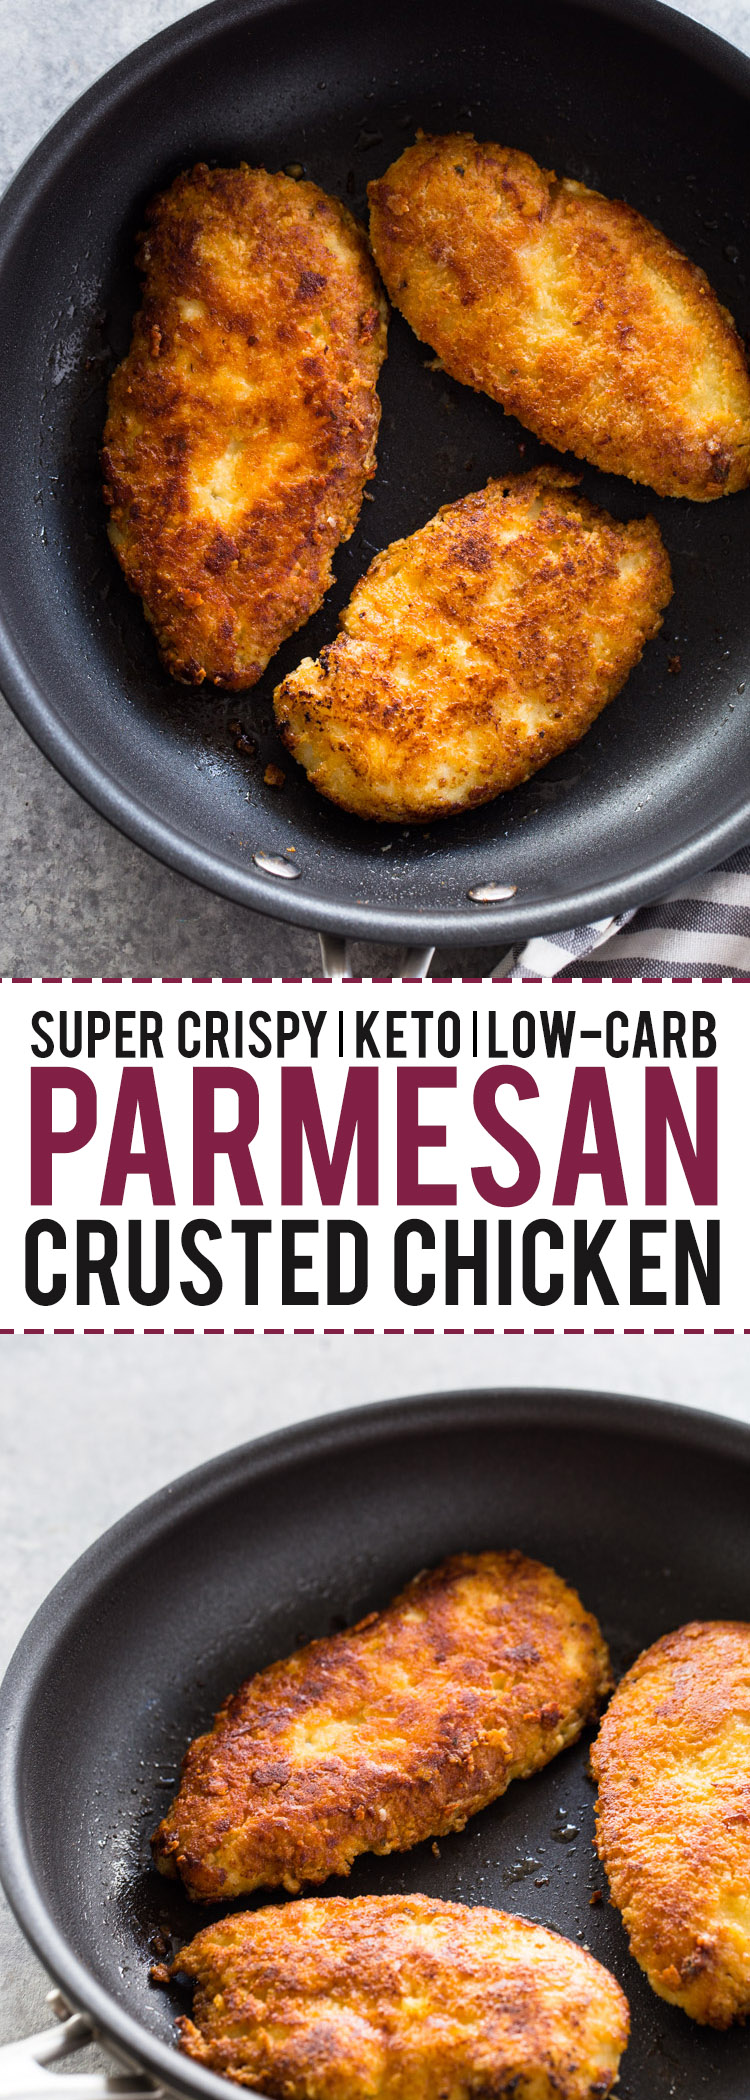 Crispy Parmesan Crusted Chicken Breasts (Low-Carb - Keto)